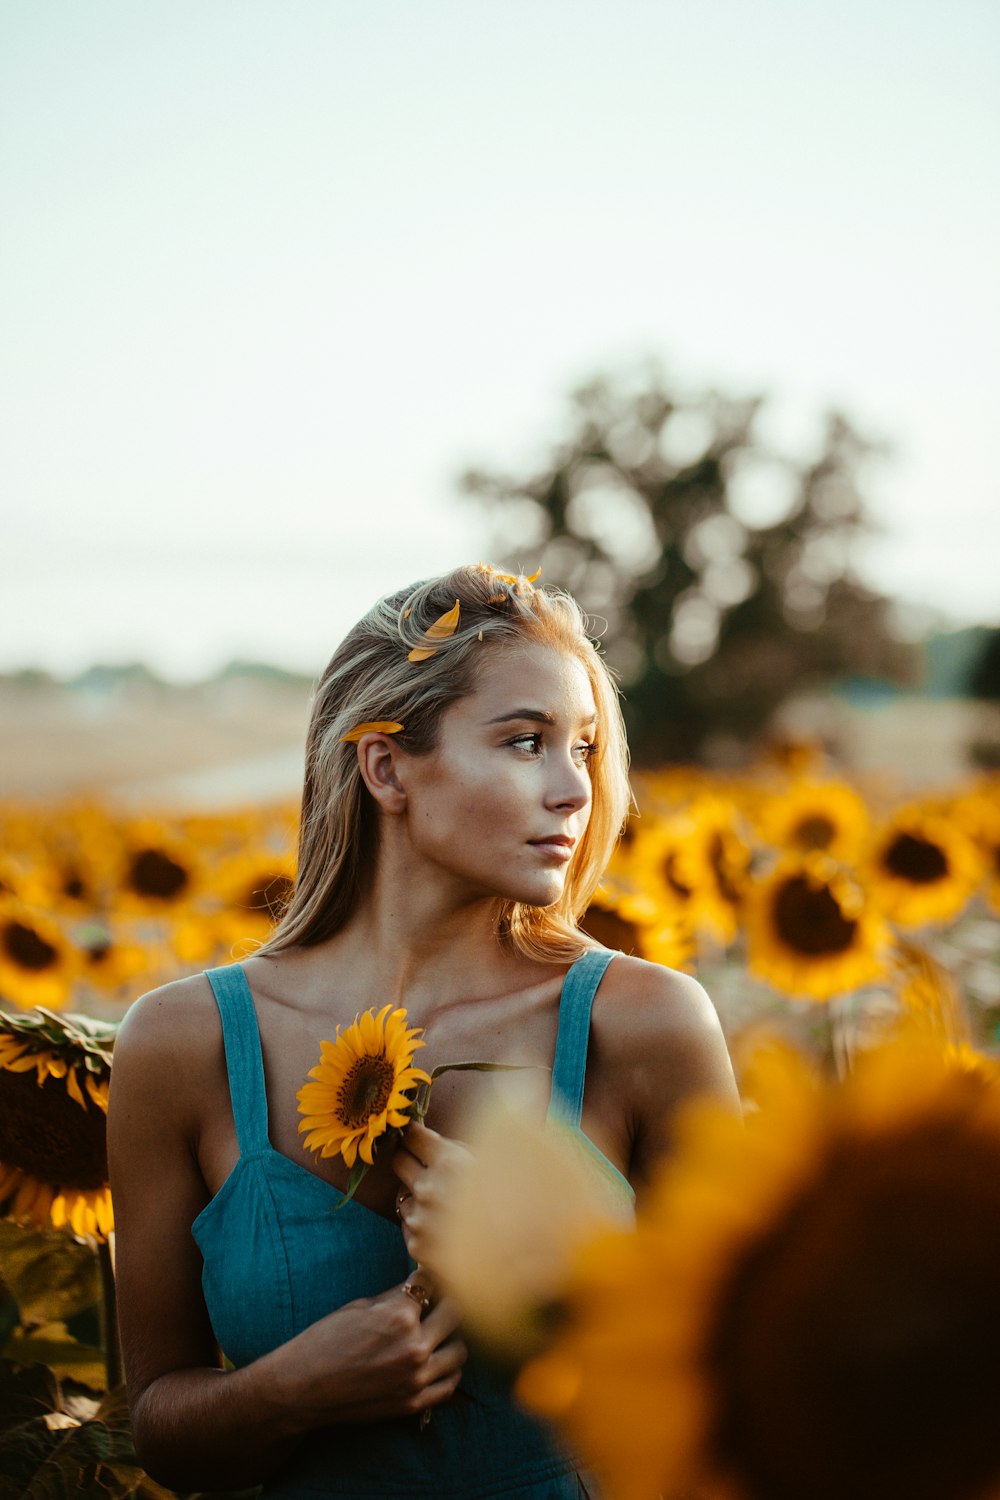 selective focus photo of woman holding sunflower surrounded by sunflowers